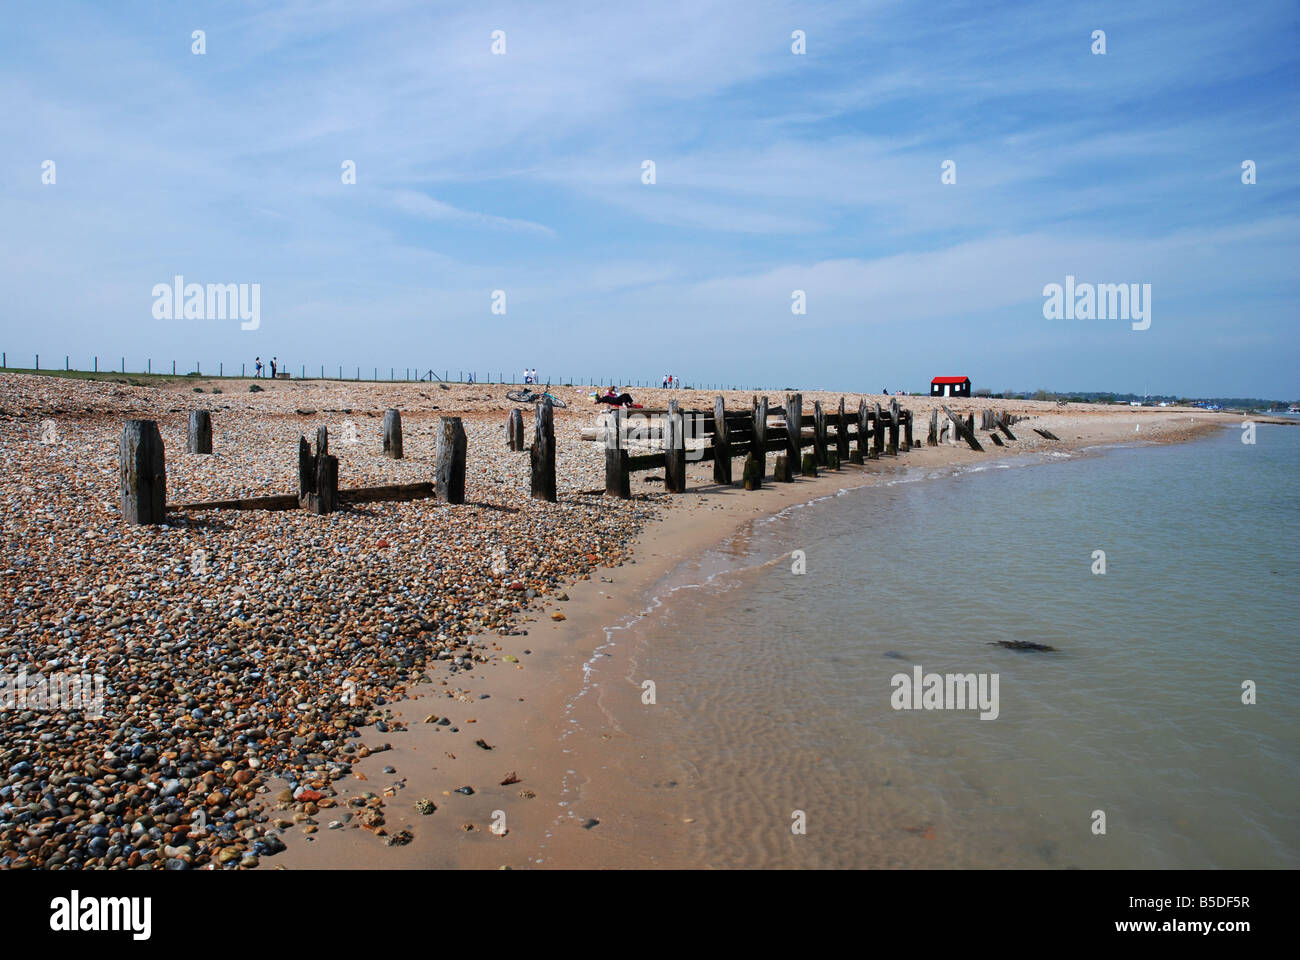 A scene showing an old wooden fence at the water's edge on Rye Harbour Nature Reserve, East Sussex, UK. Stock Photo